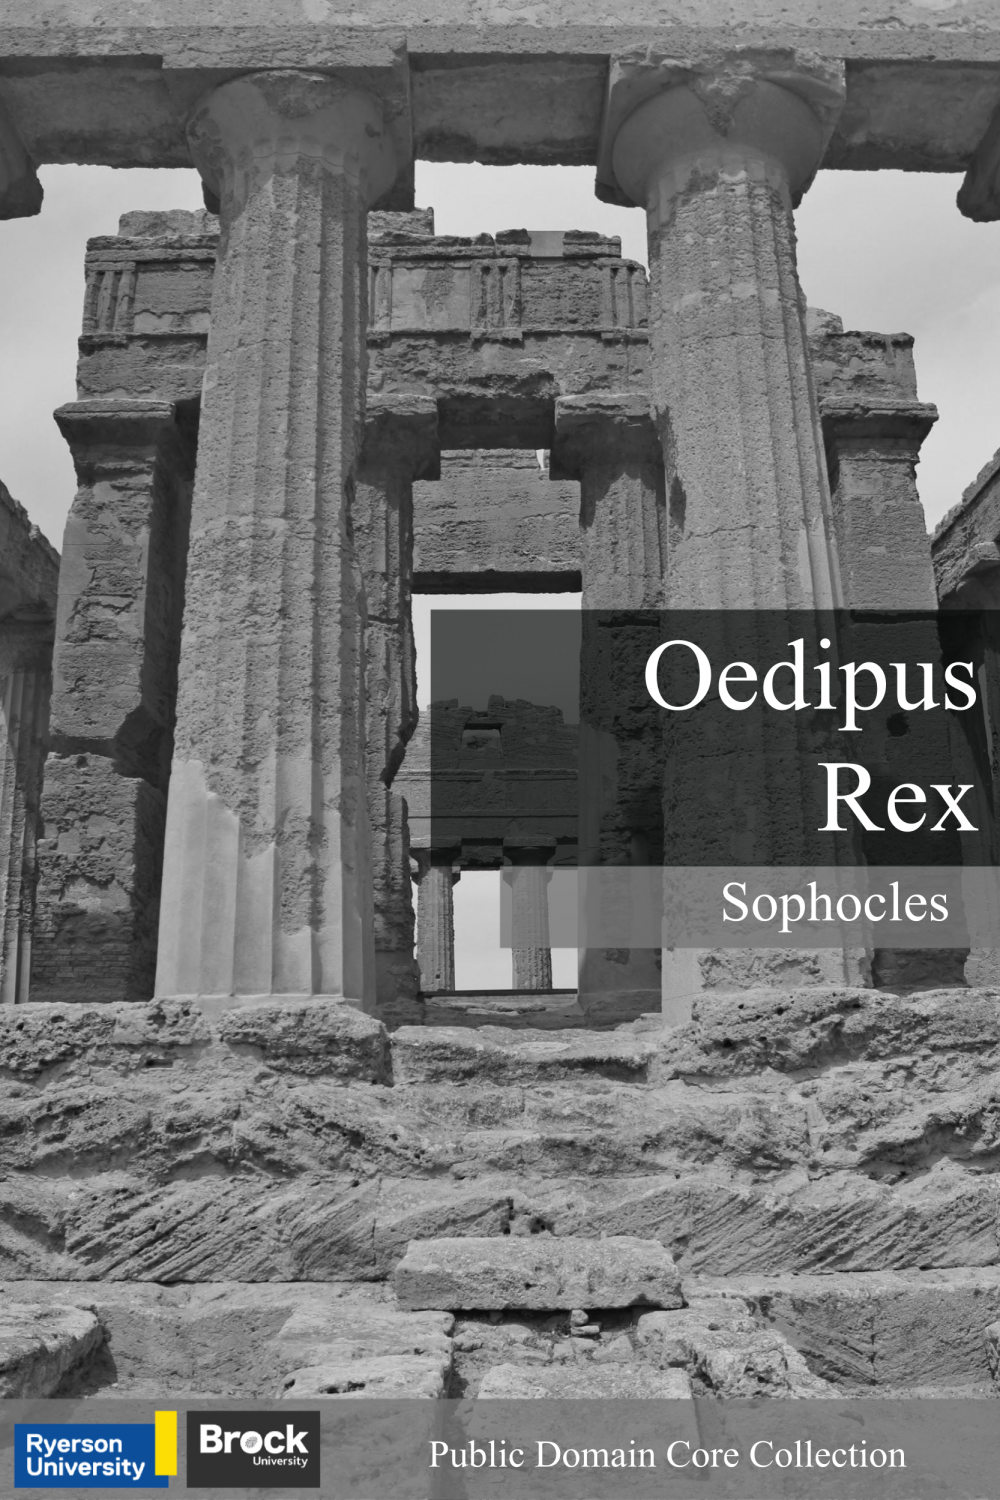 is oedipus rex the same as oedipus the king